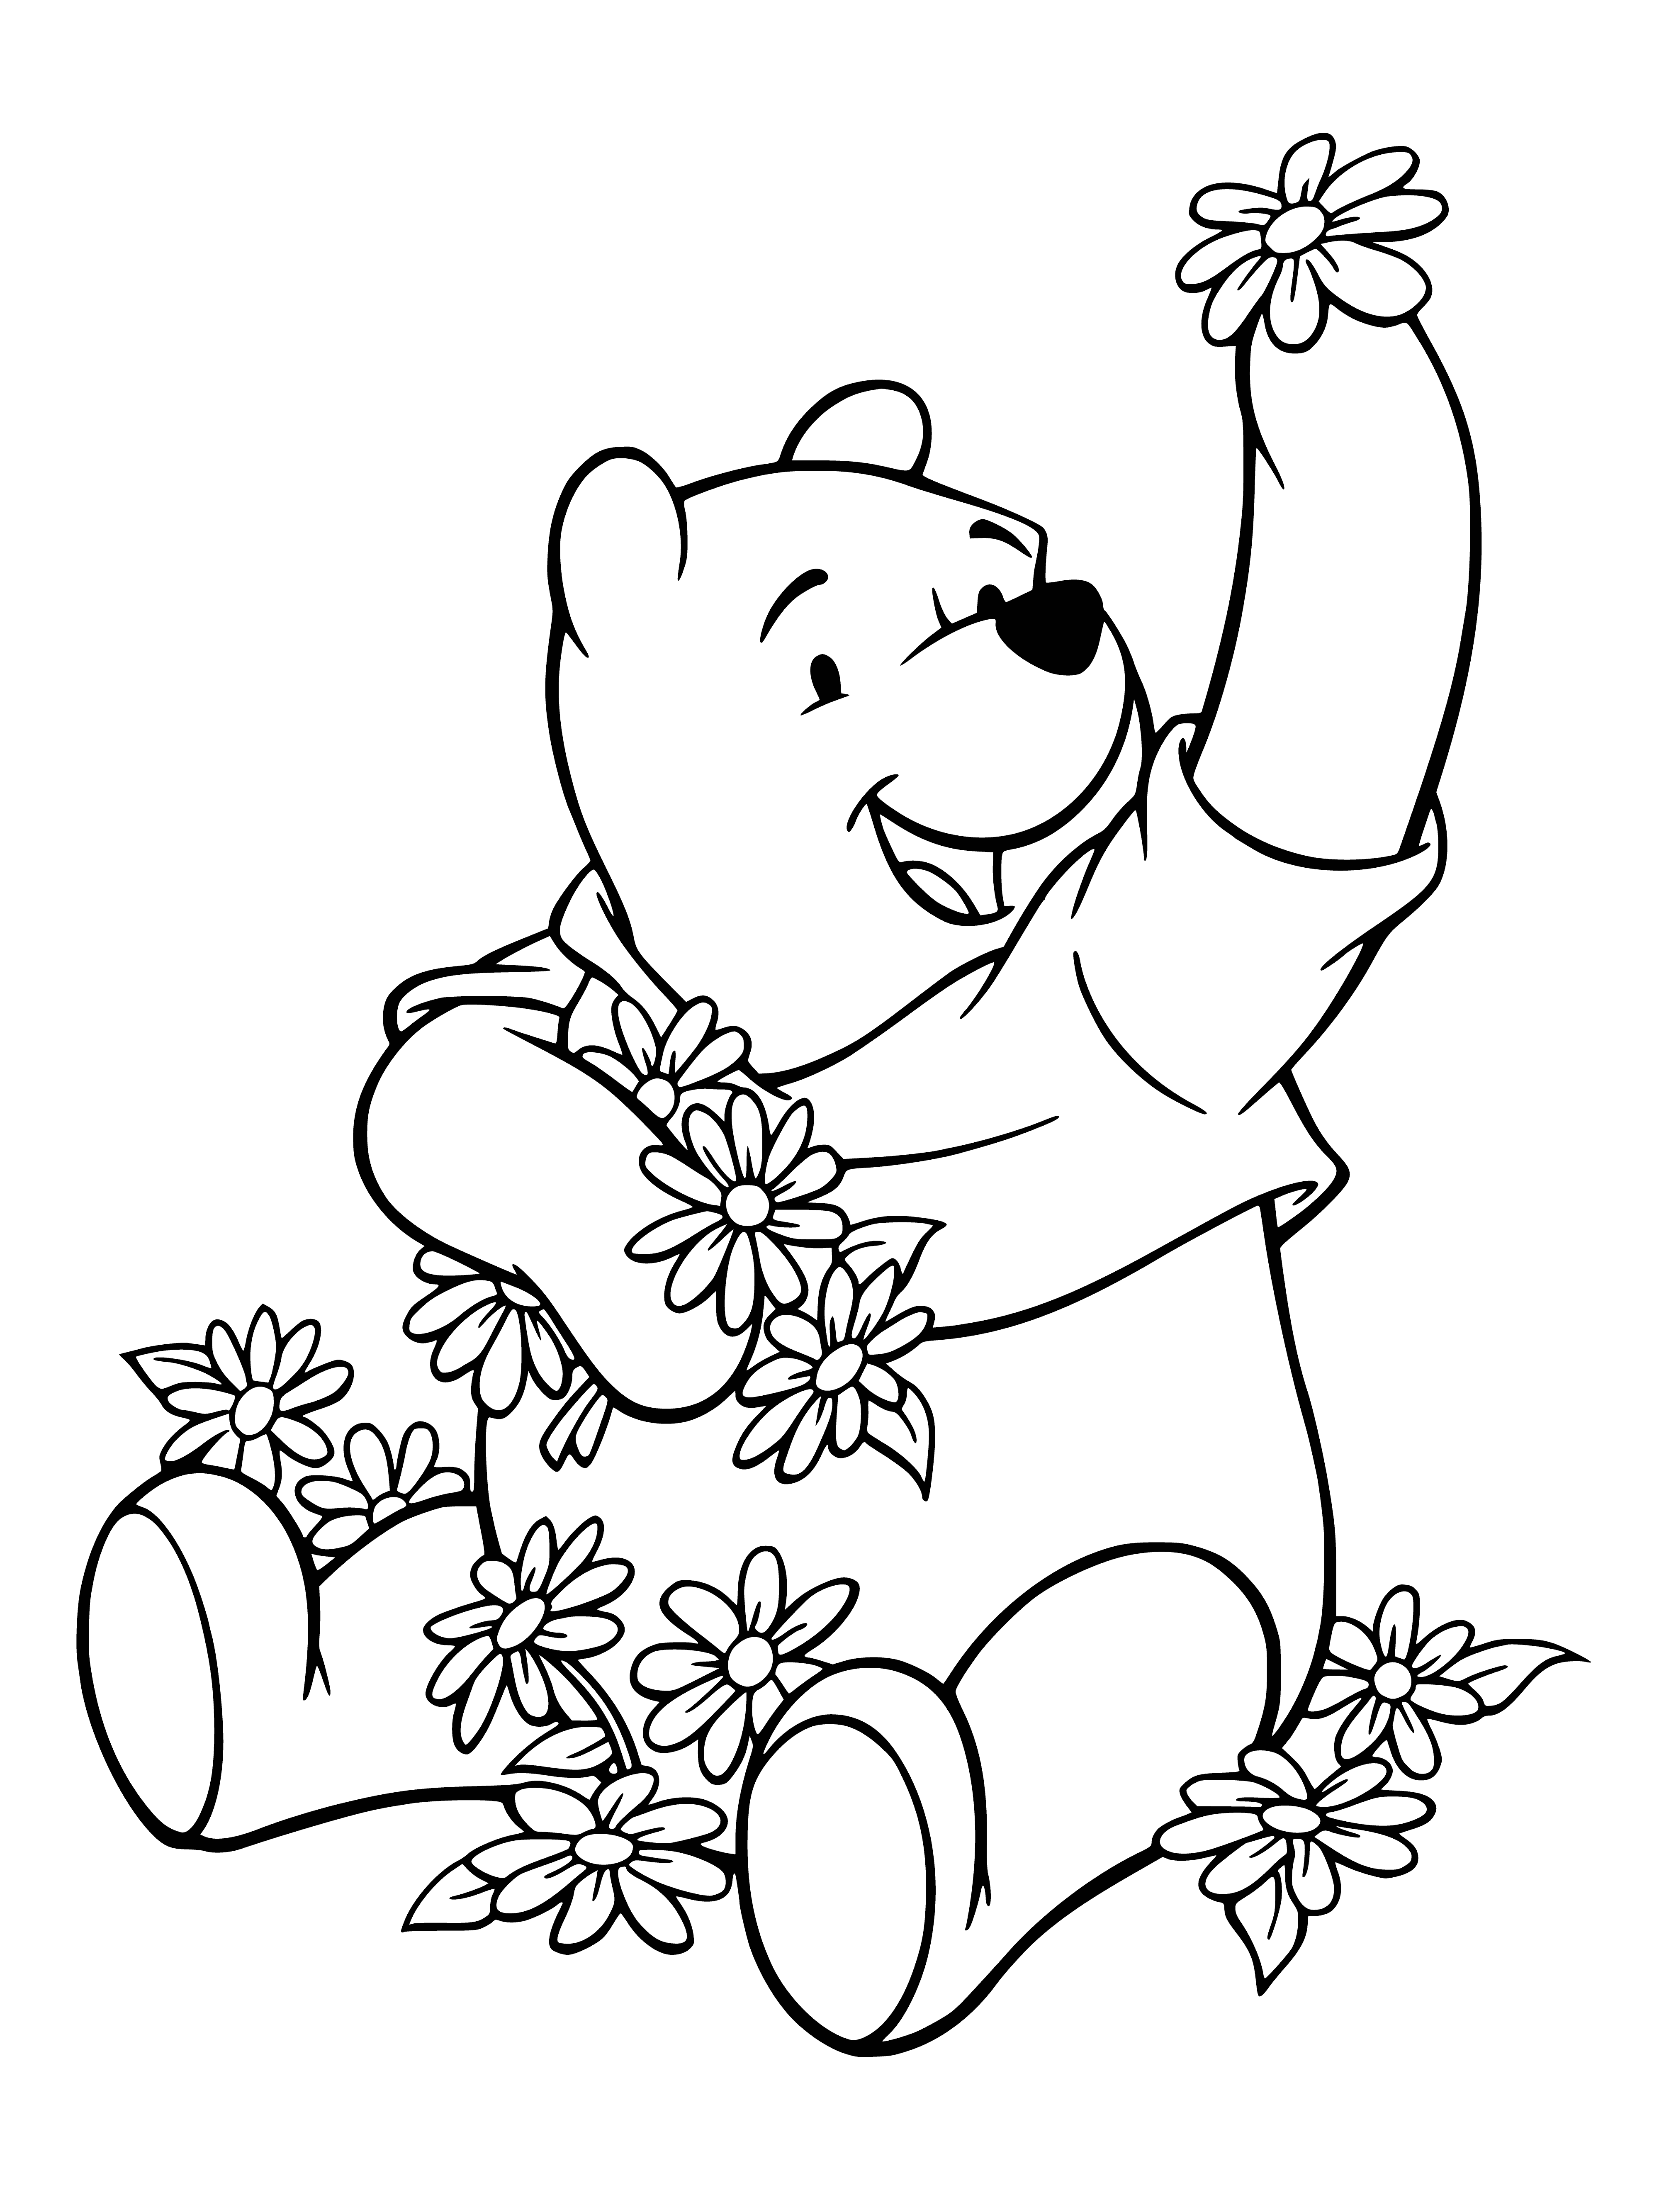 coloring page: Teddy bear w/ flowers around it: brown bear, black nose; yellow flowers, green stems.